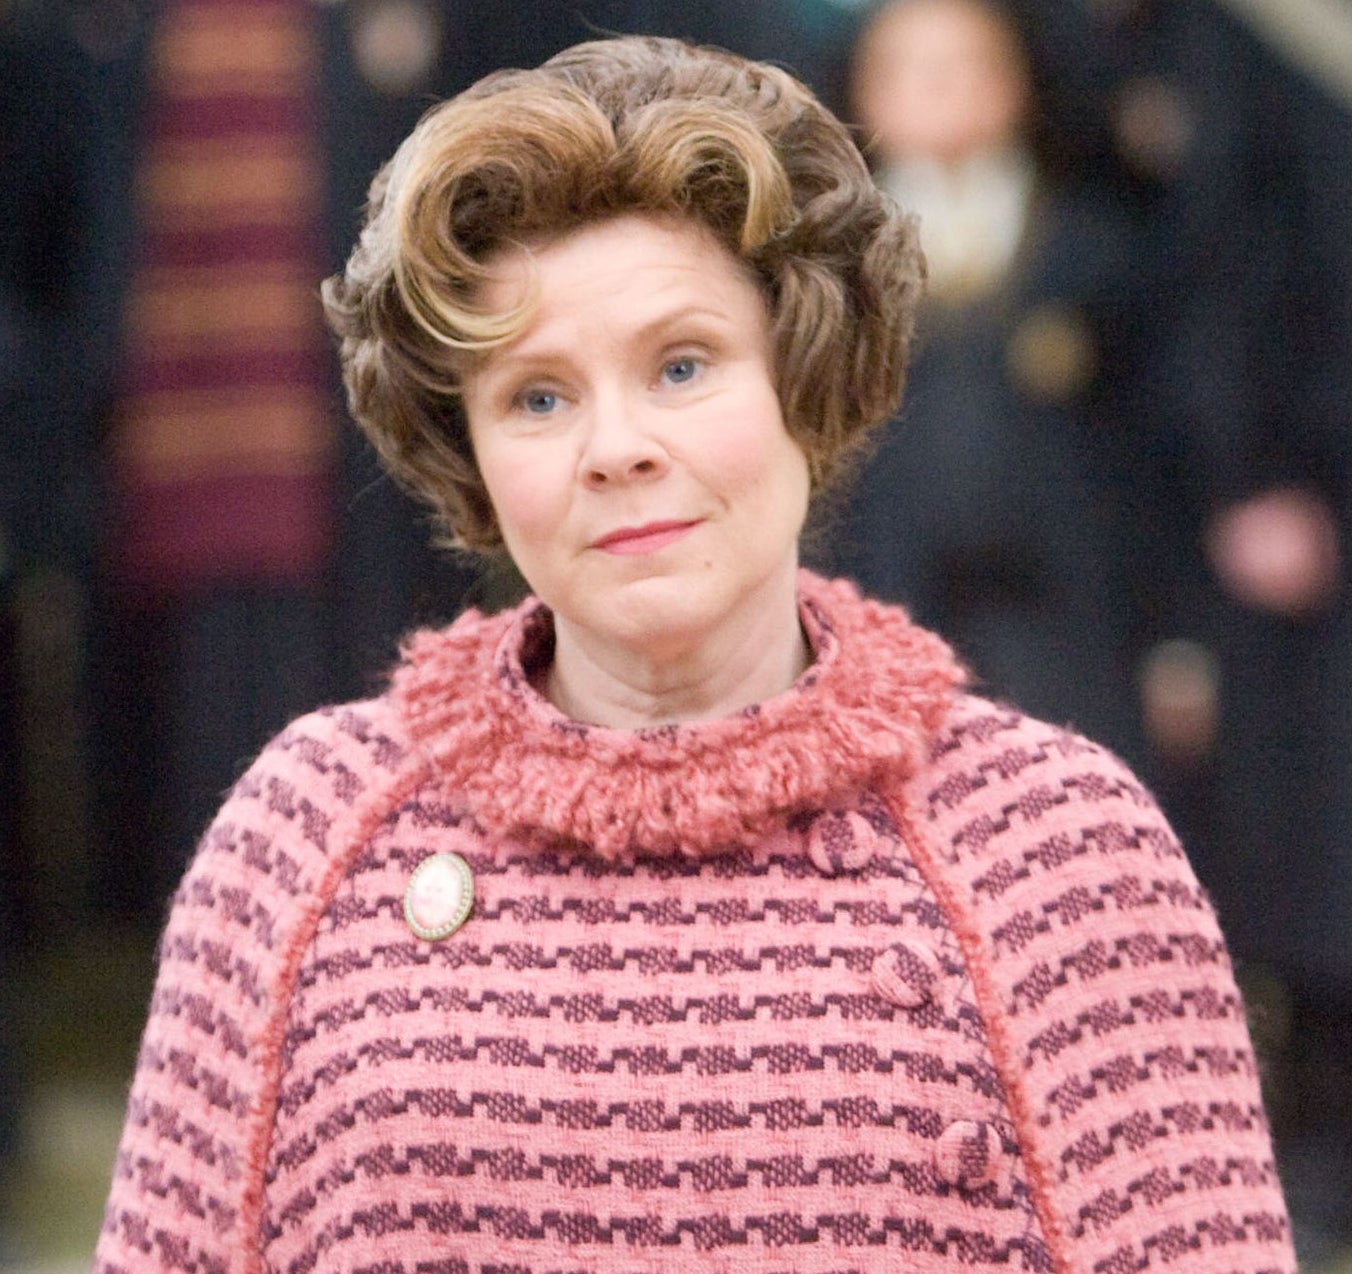 Delores Umbridge in all pink and looking smug